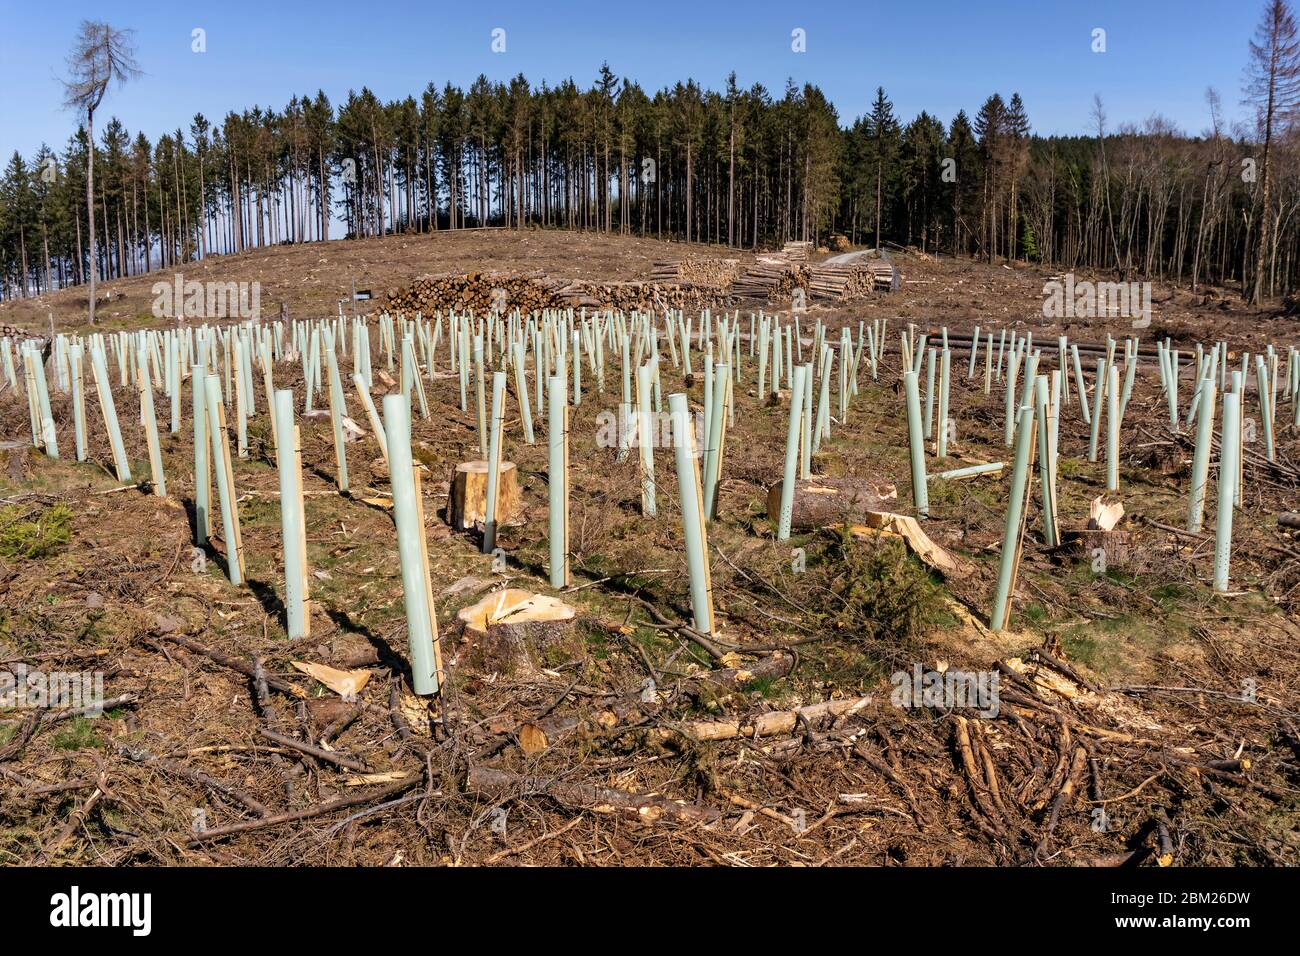 After forest damage and clear-cutting, reforestation with seedlings begins at Eichkopf in the Taunus near Sandplacken. Stock Photo